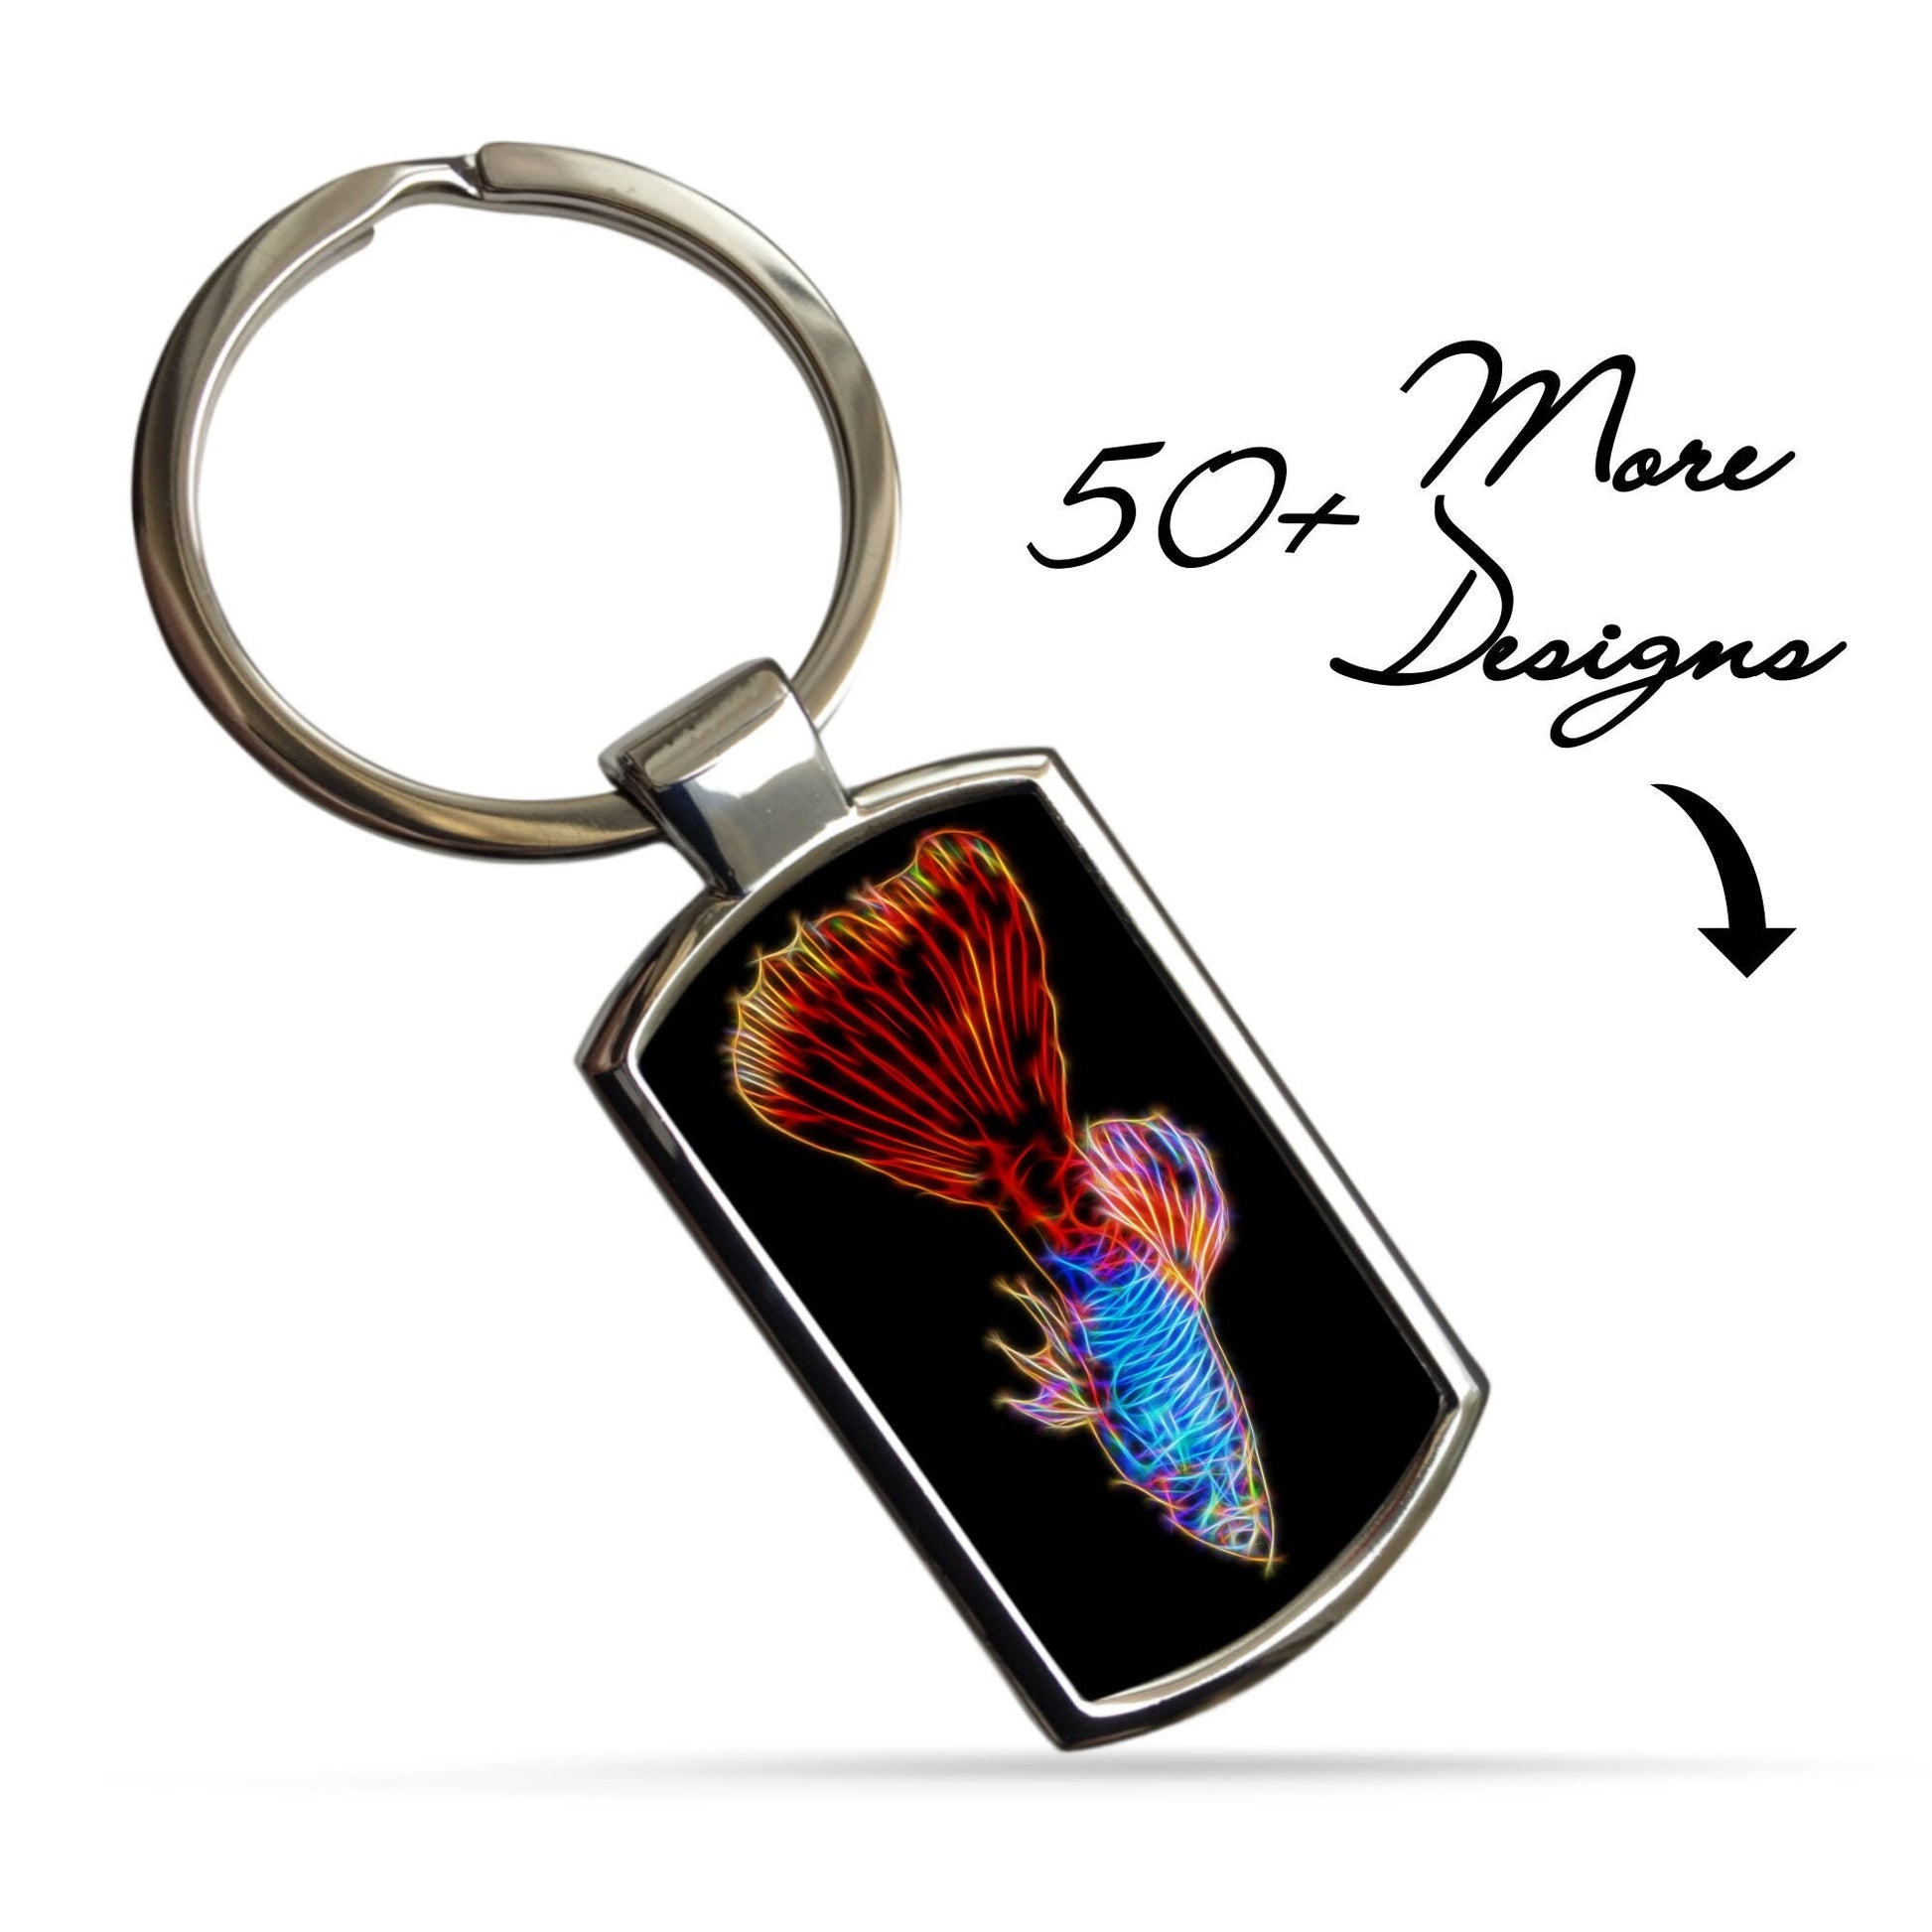 Fish Keychain / Keyring / Bagtag including Betta, Cichlid, Guppy, Discus, Angel.  A Perfect Gift for Aquatic Lover.